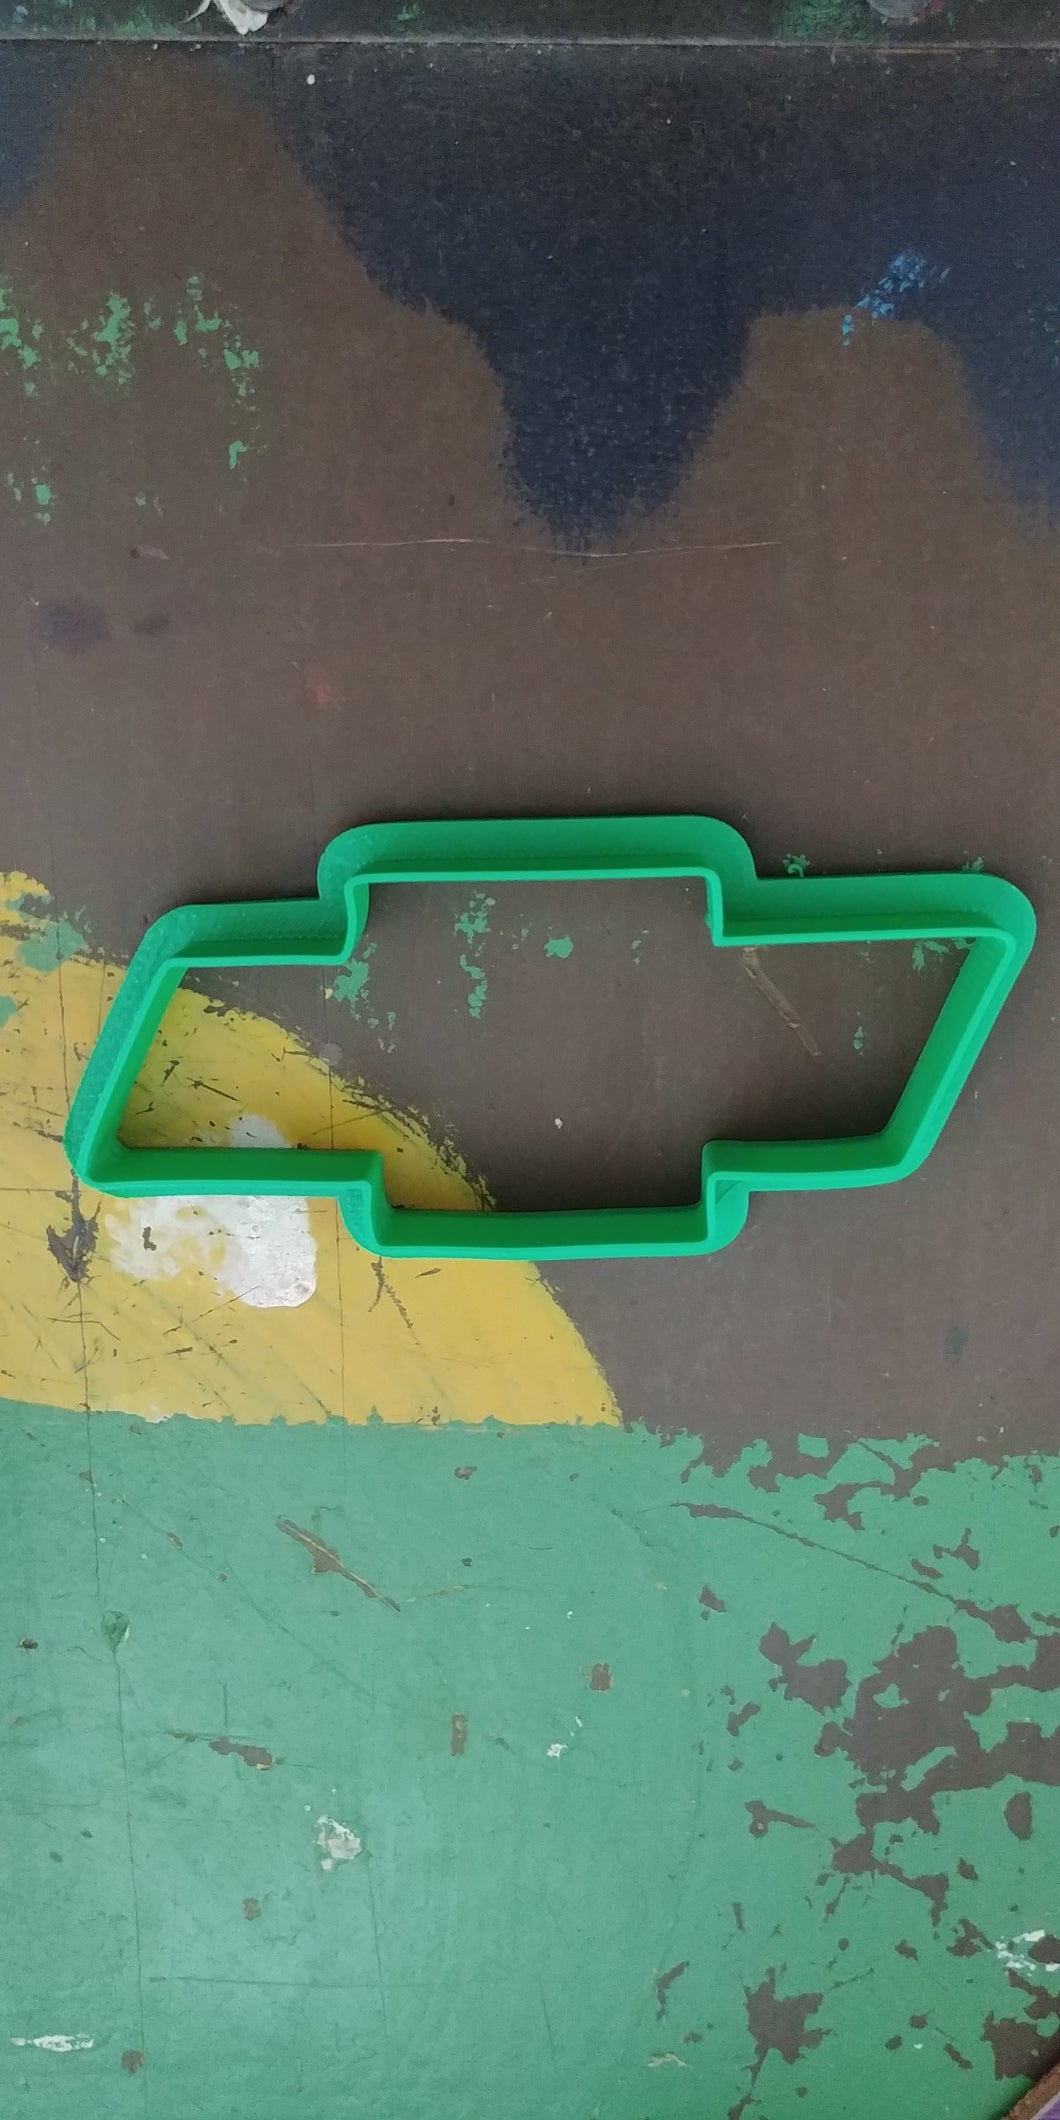 3D Printed Cookie Cutter Inspired by Chevrolet Bowtie Emblem